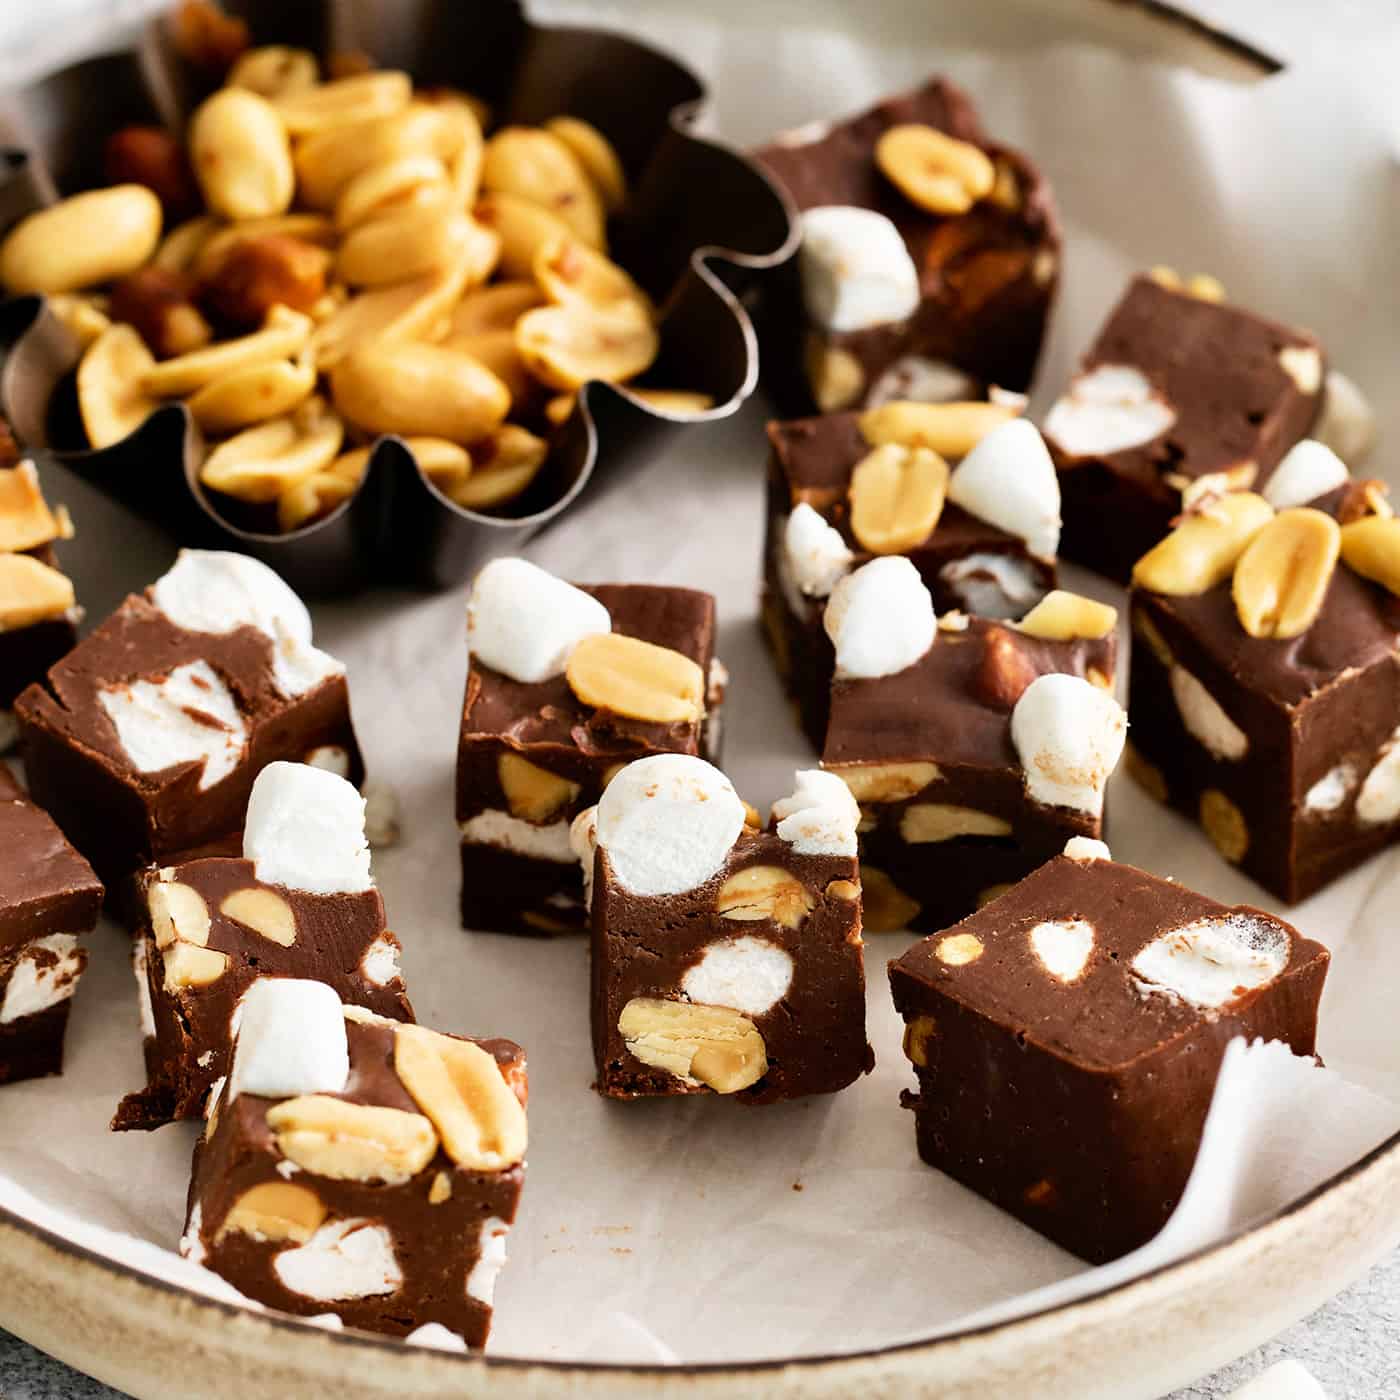 Overhead view of a plate of rocky road fudge